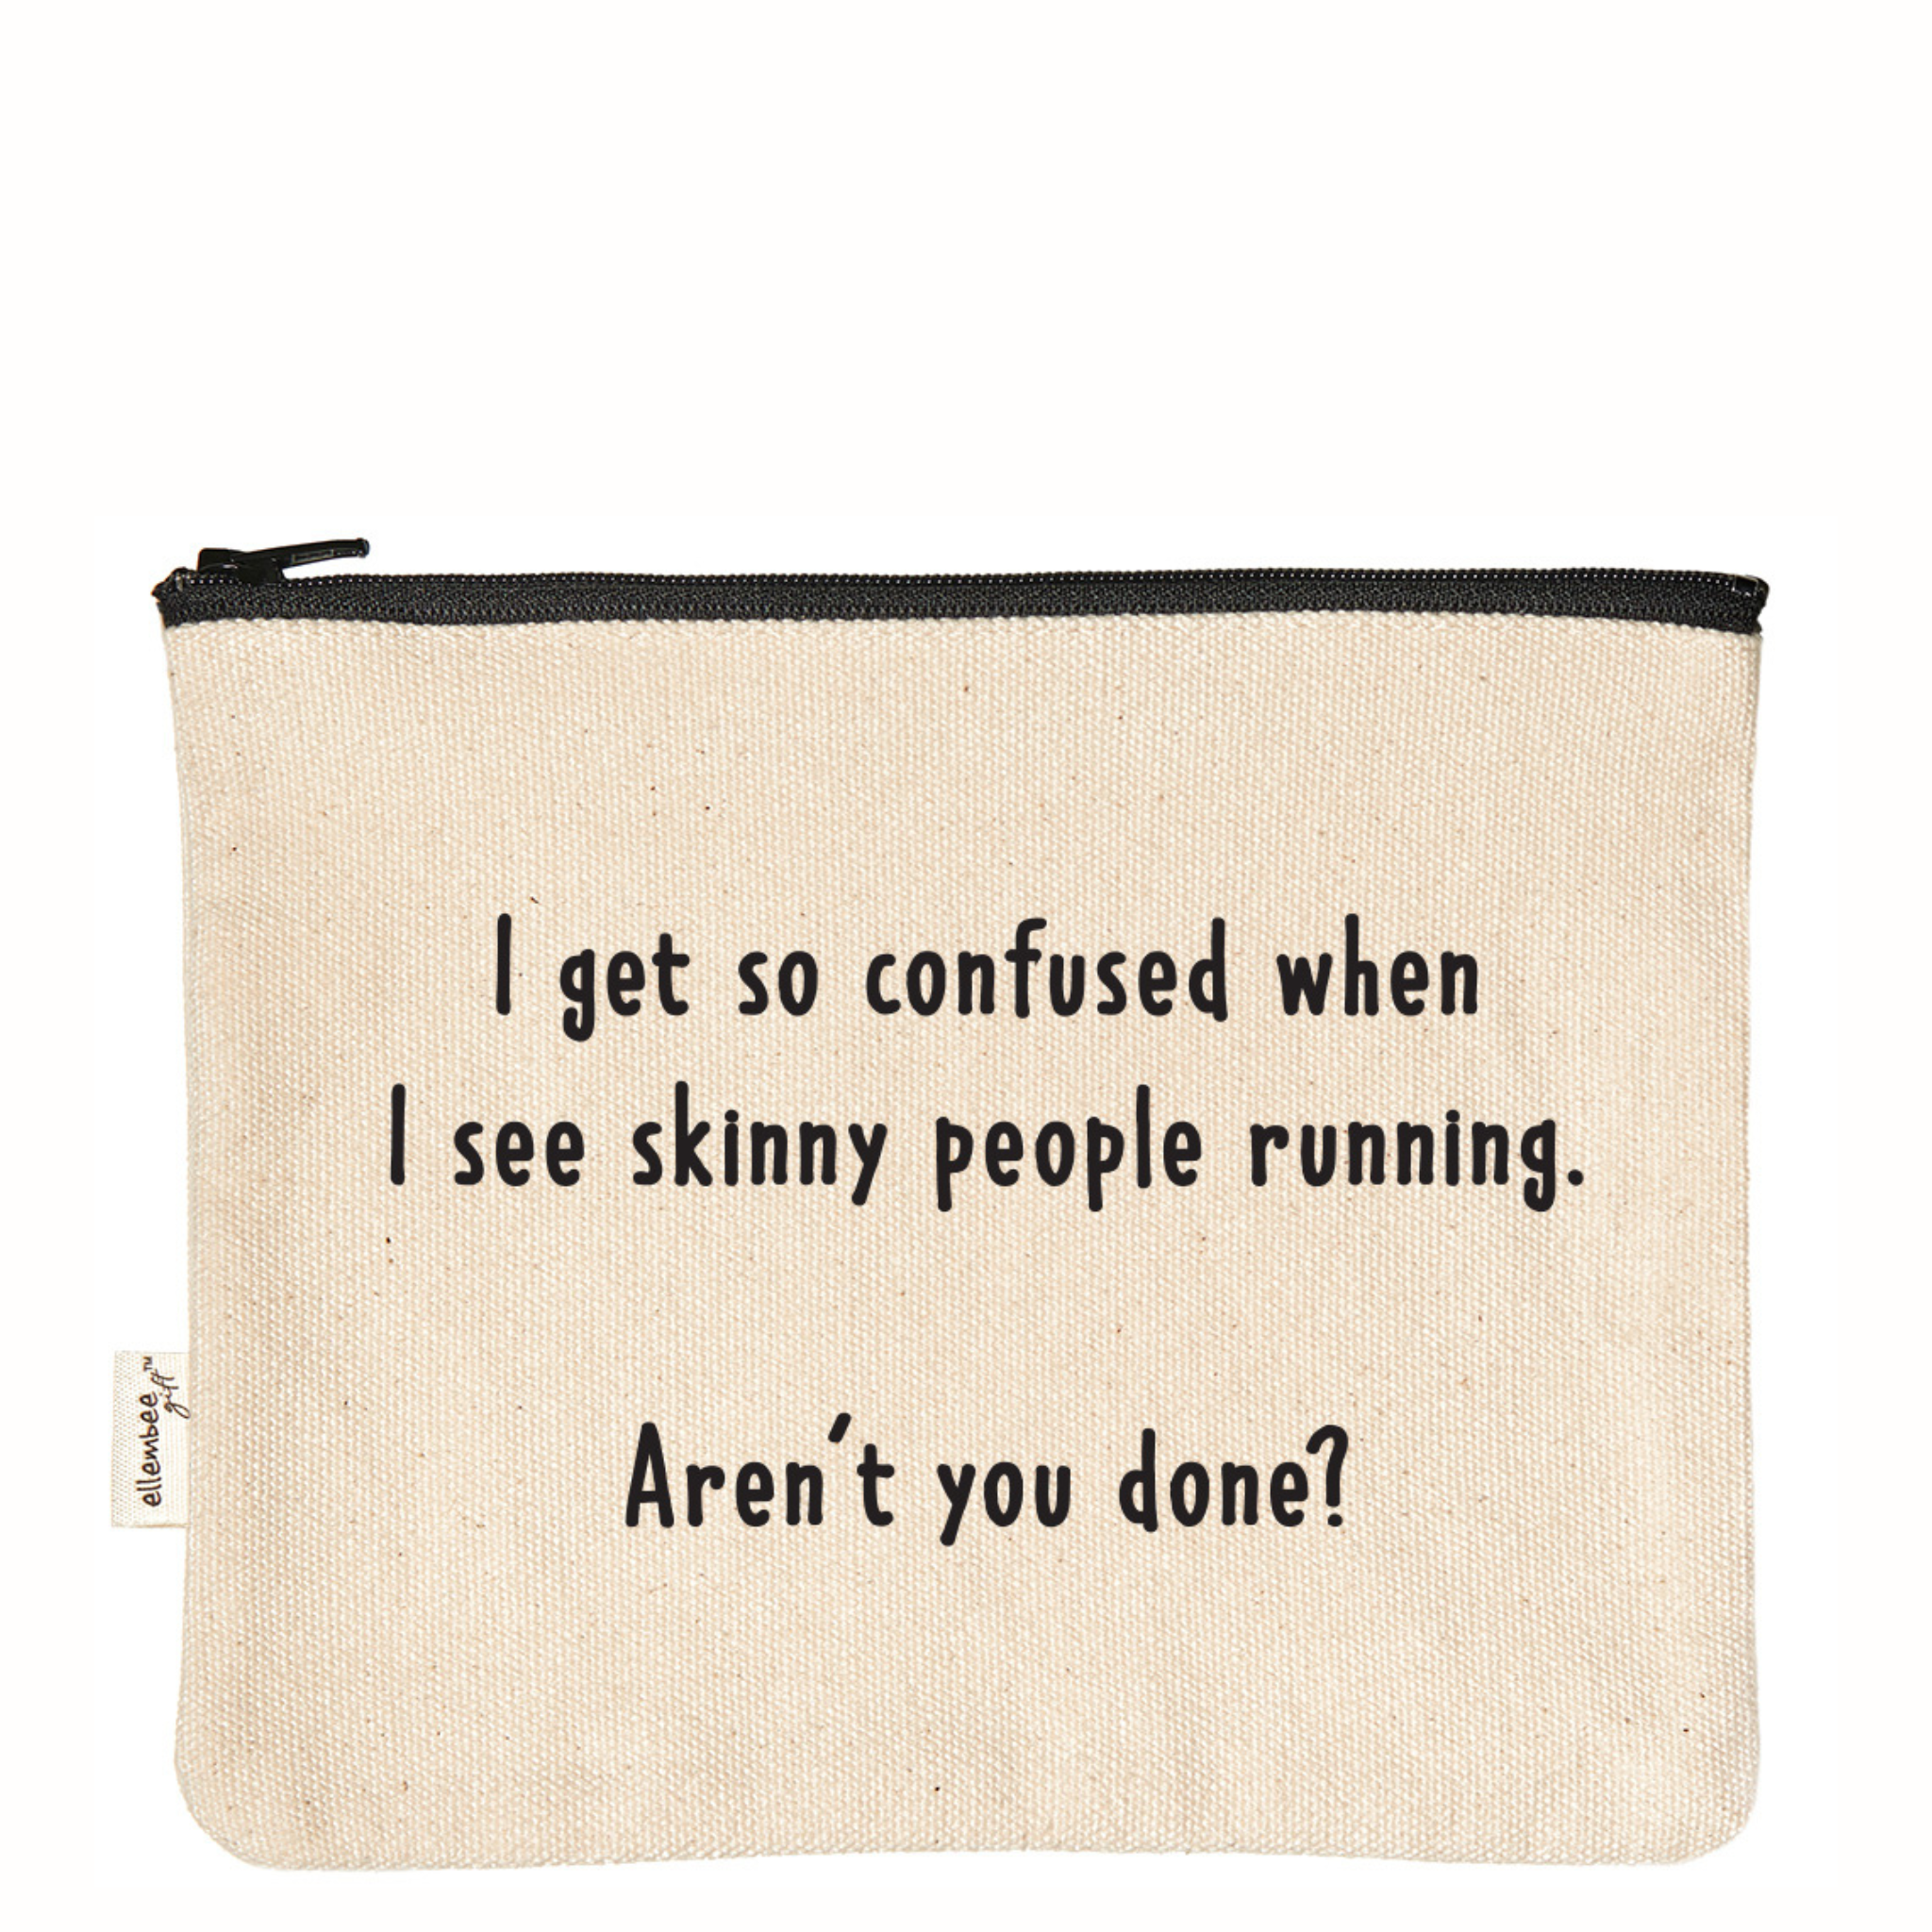 Skinny People Running - Aren't You Done? Pouch